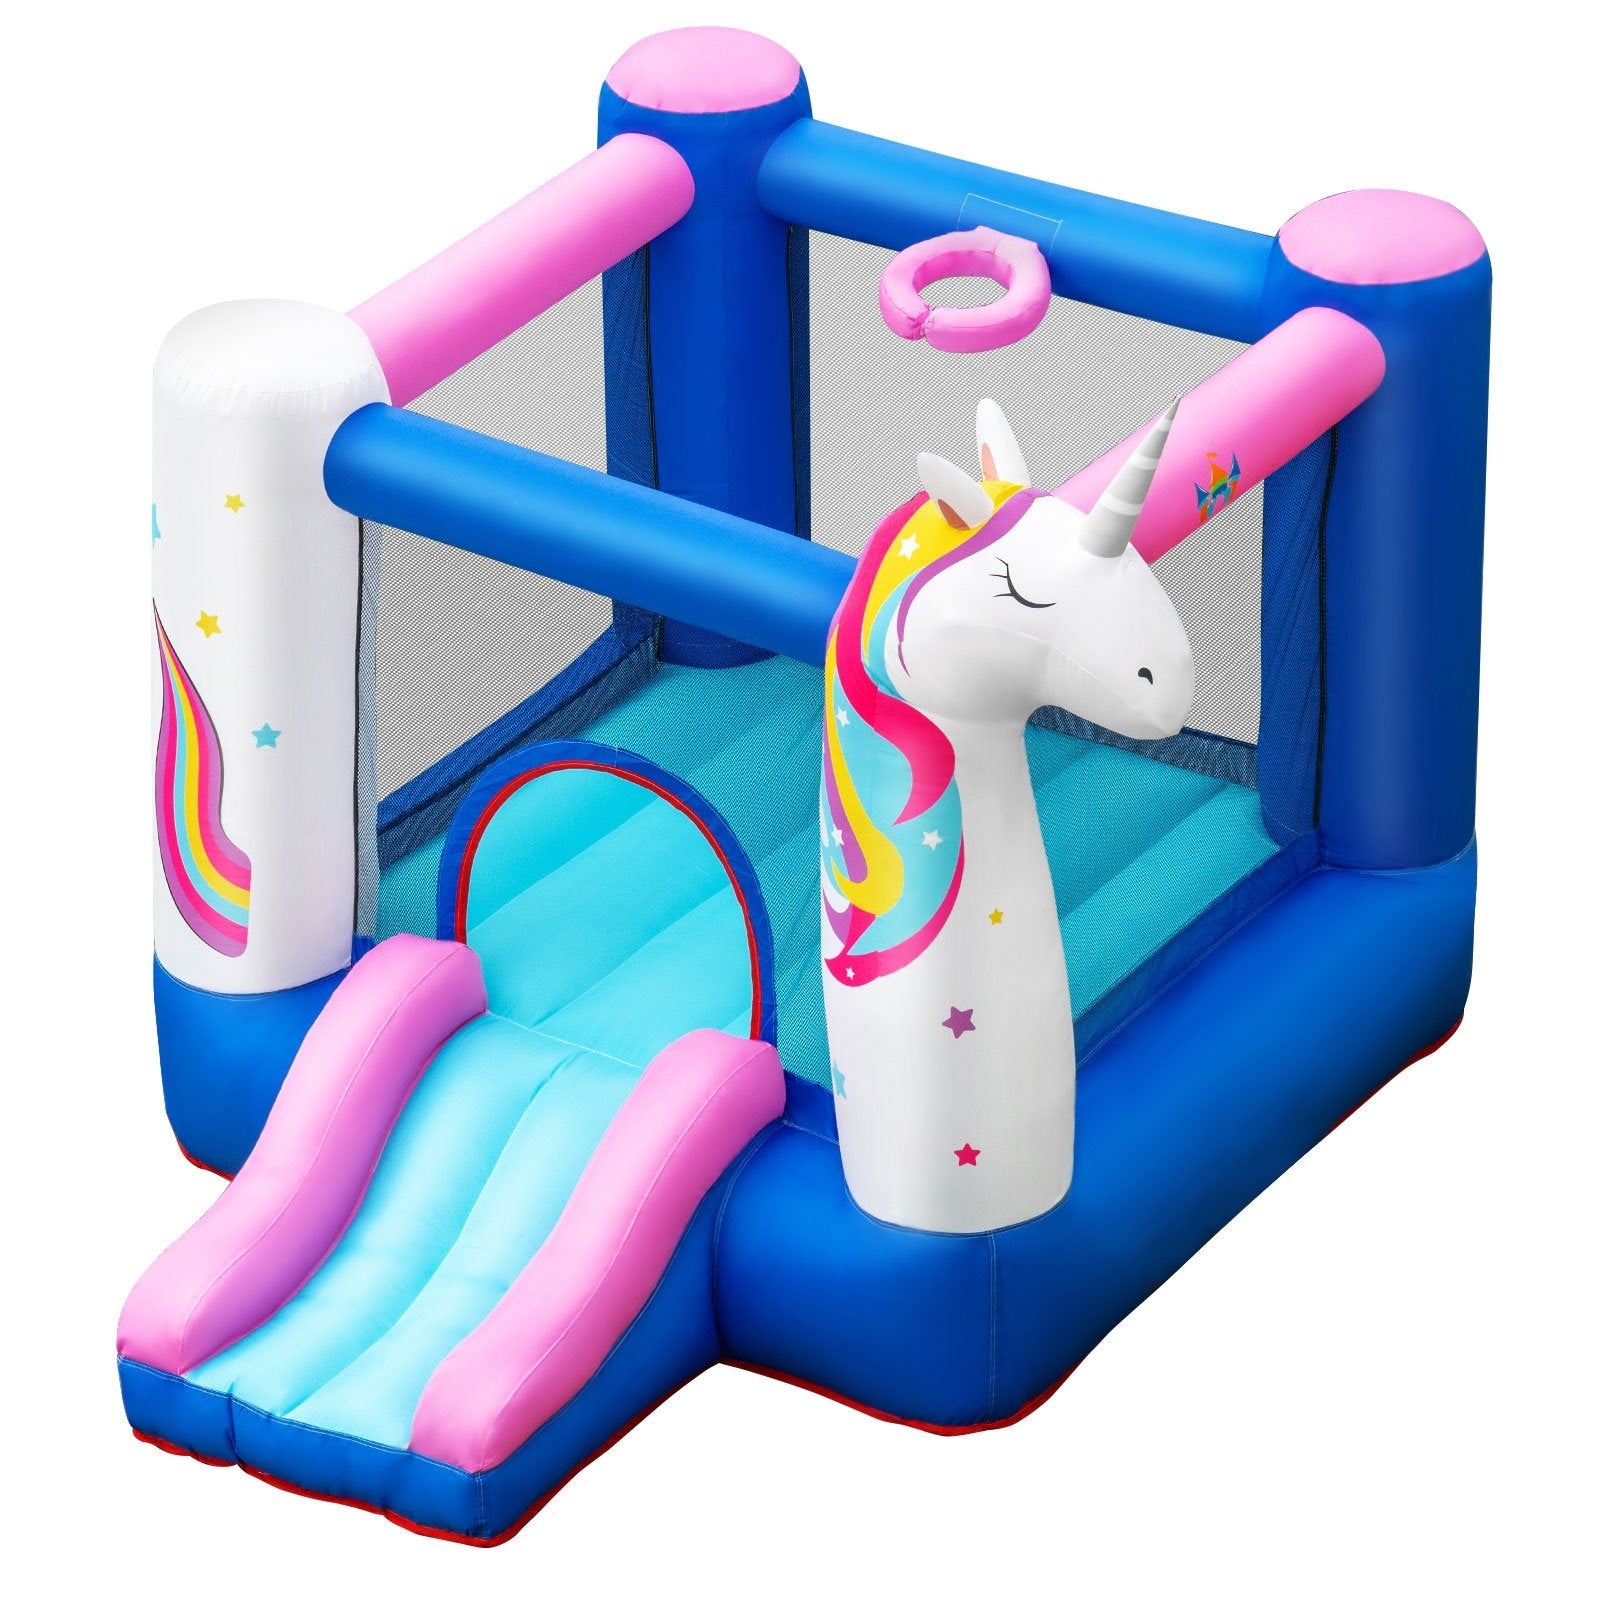 Inflatable Slide Bouncer with Basketball Hoop for Kids Without Blower - Gallery Canada